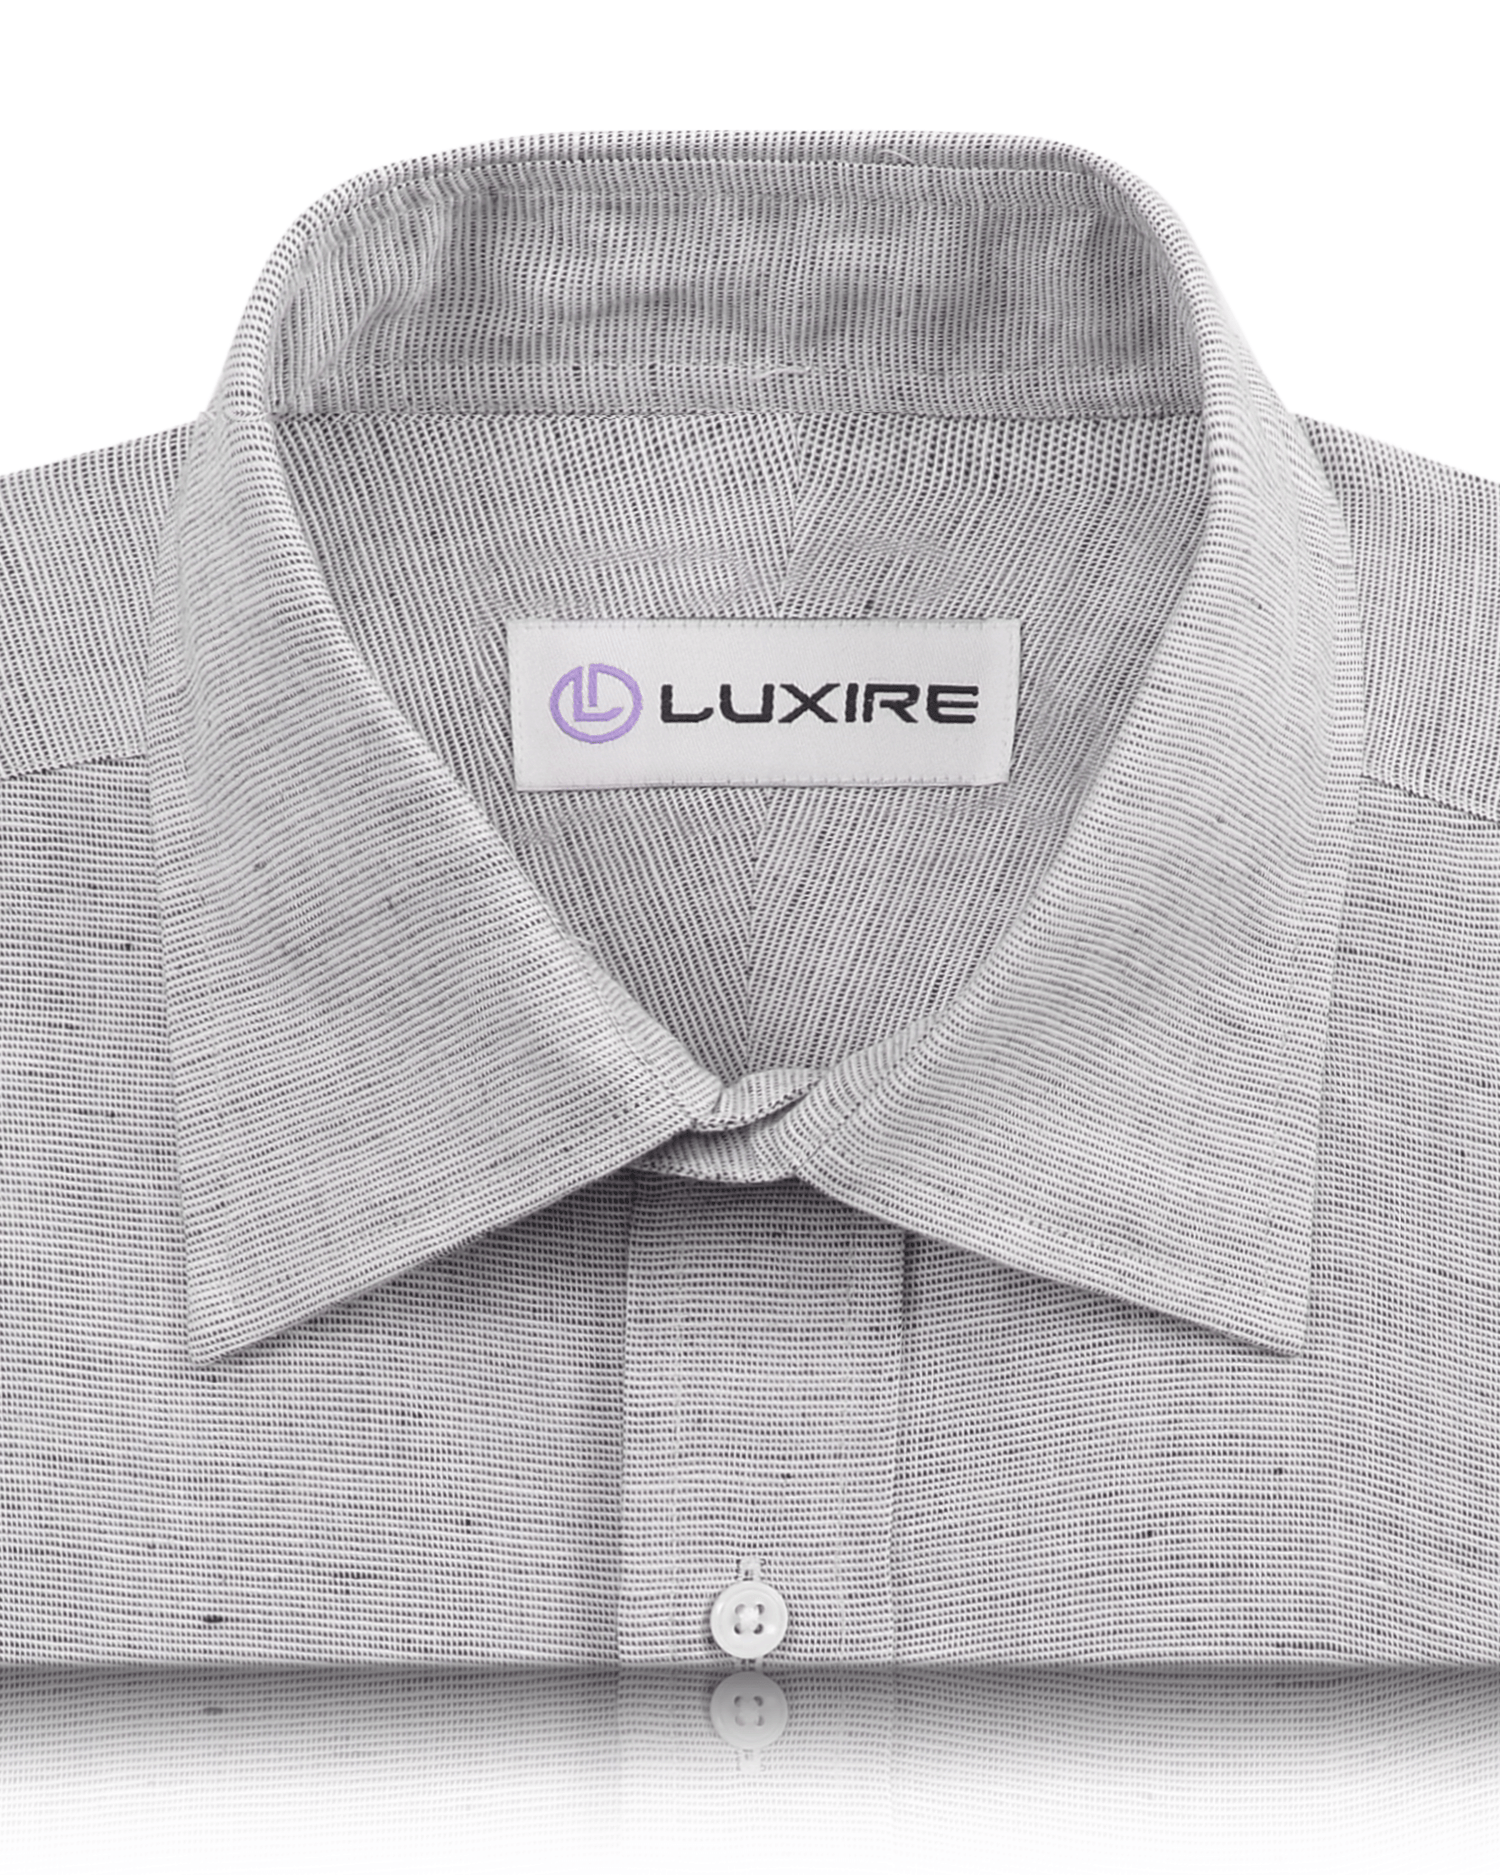 Collar of the custom linen shirt for men in black and white chambray by Luxire Clothing